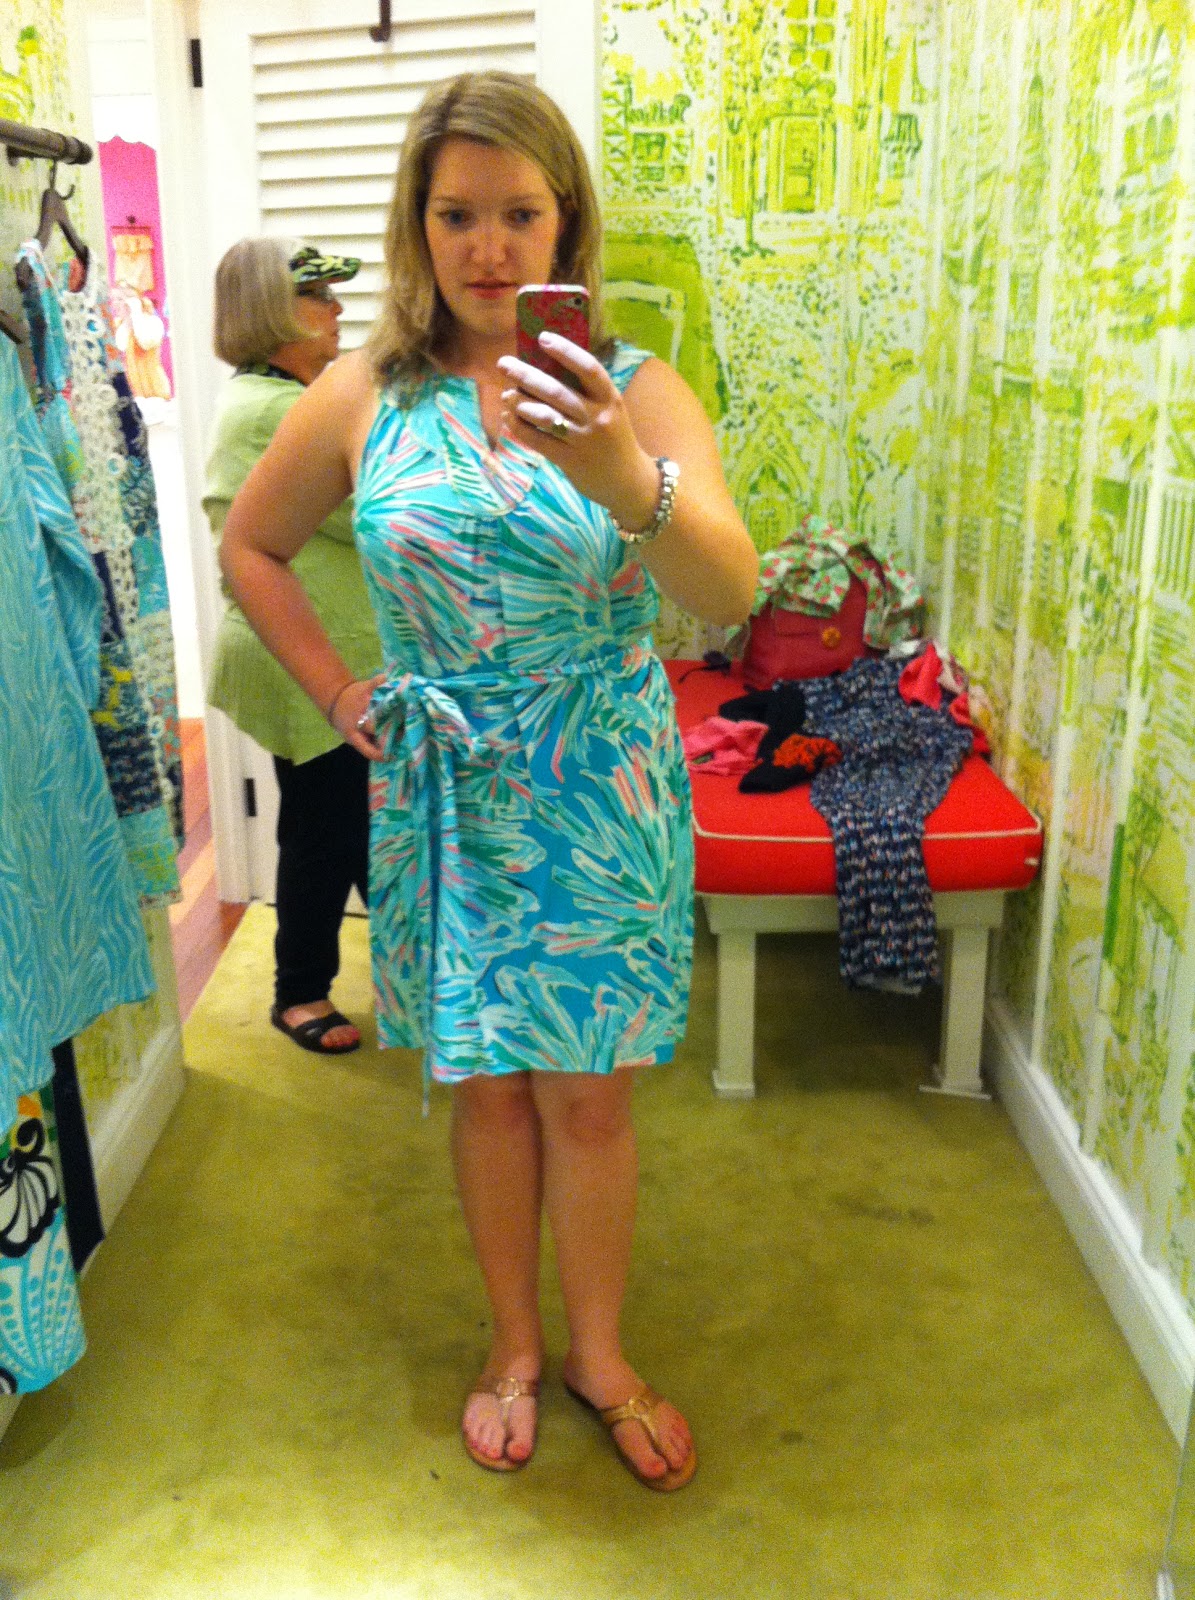 Pursuing Domestic Goddess-ness: Lilly Pulitzer Warehouse Sale!